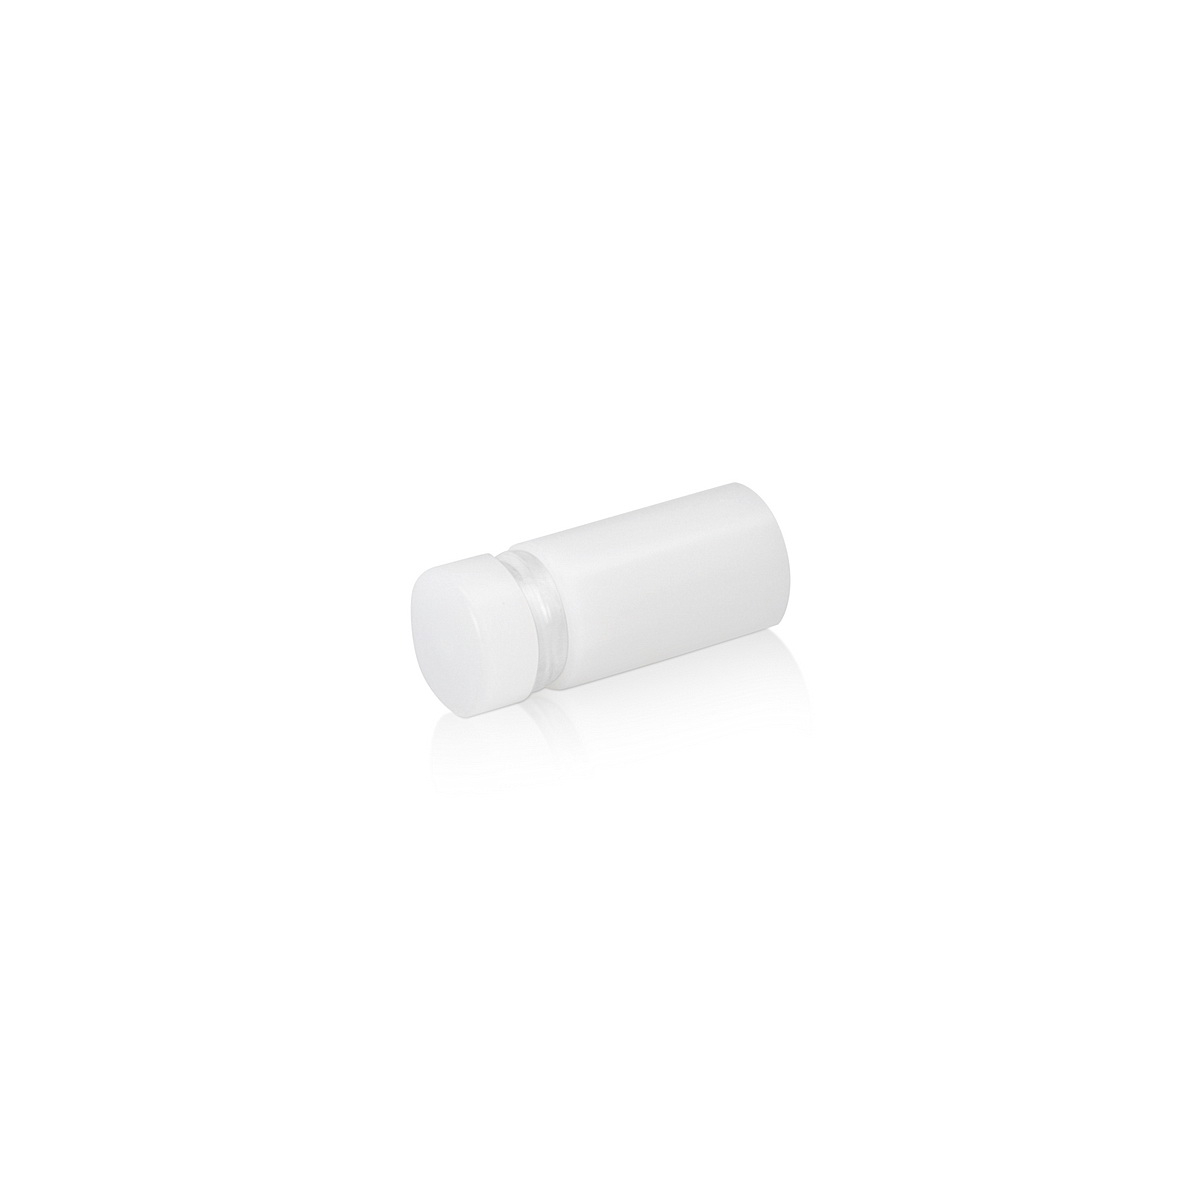 5/8'' Diameter X 1-3/4'' Barrel Length, White Acrylic Standoff. Easy Fasten Standoff (For Inside Use Only) Tamper Proof [Required Material Hole Size: 3/8'']